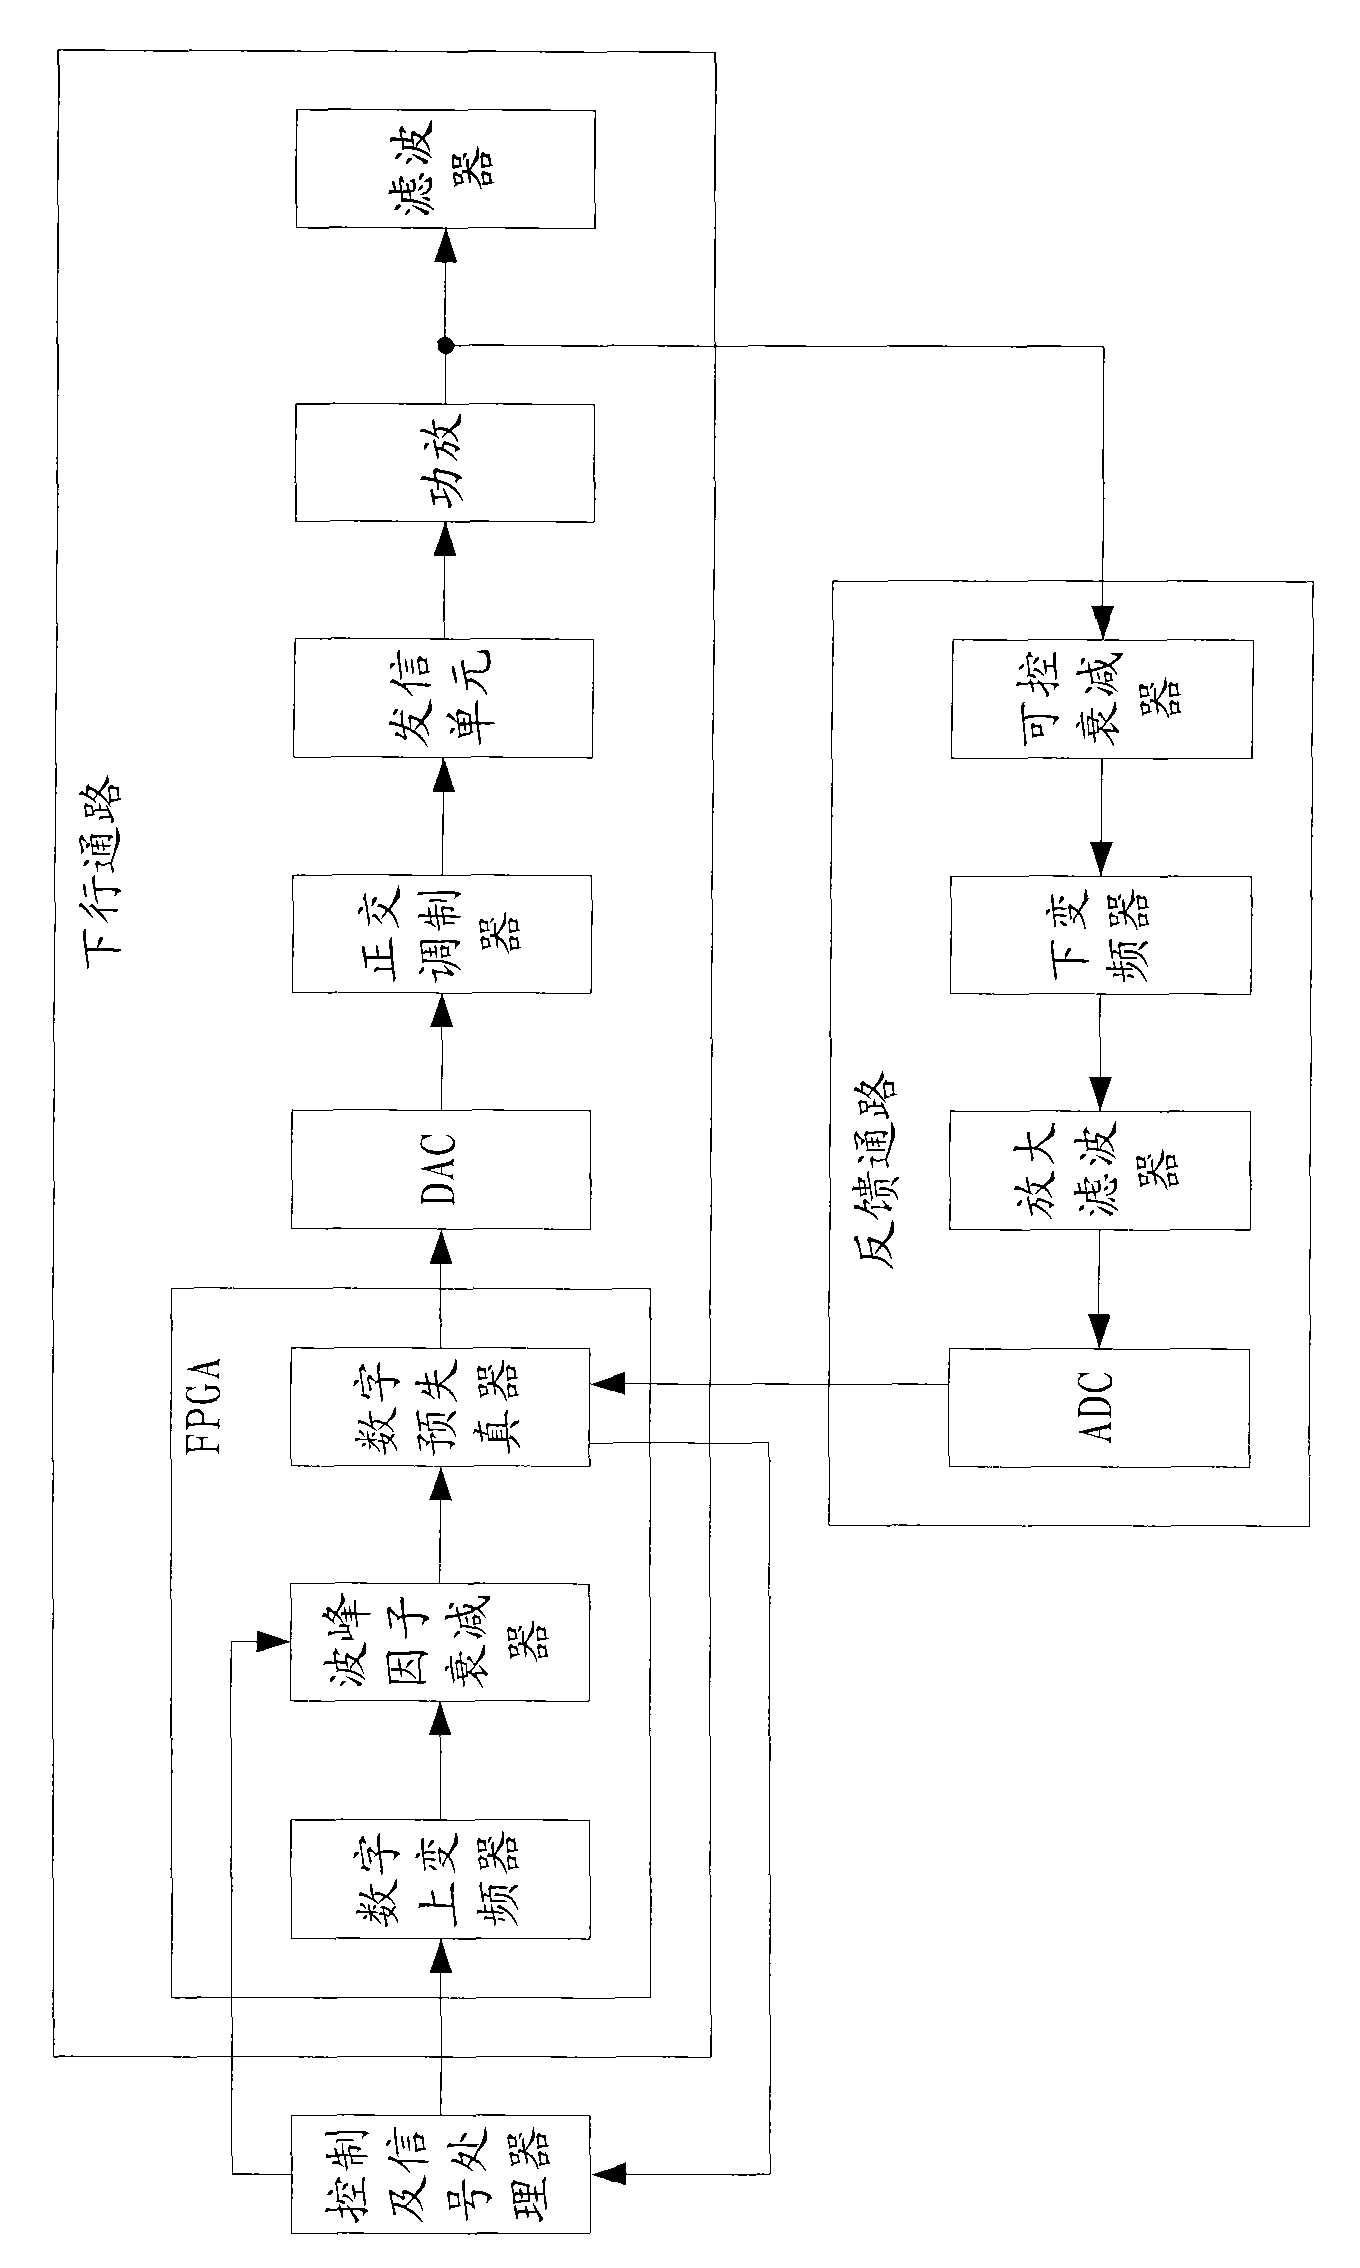 Method for adaptively adjusting CFR threshold and radio frequency zooming system